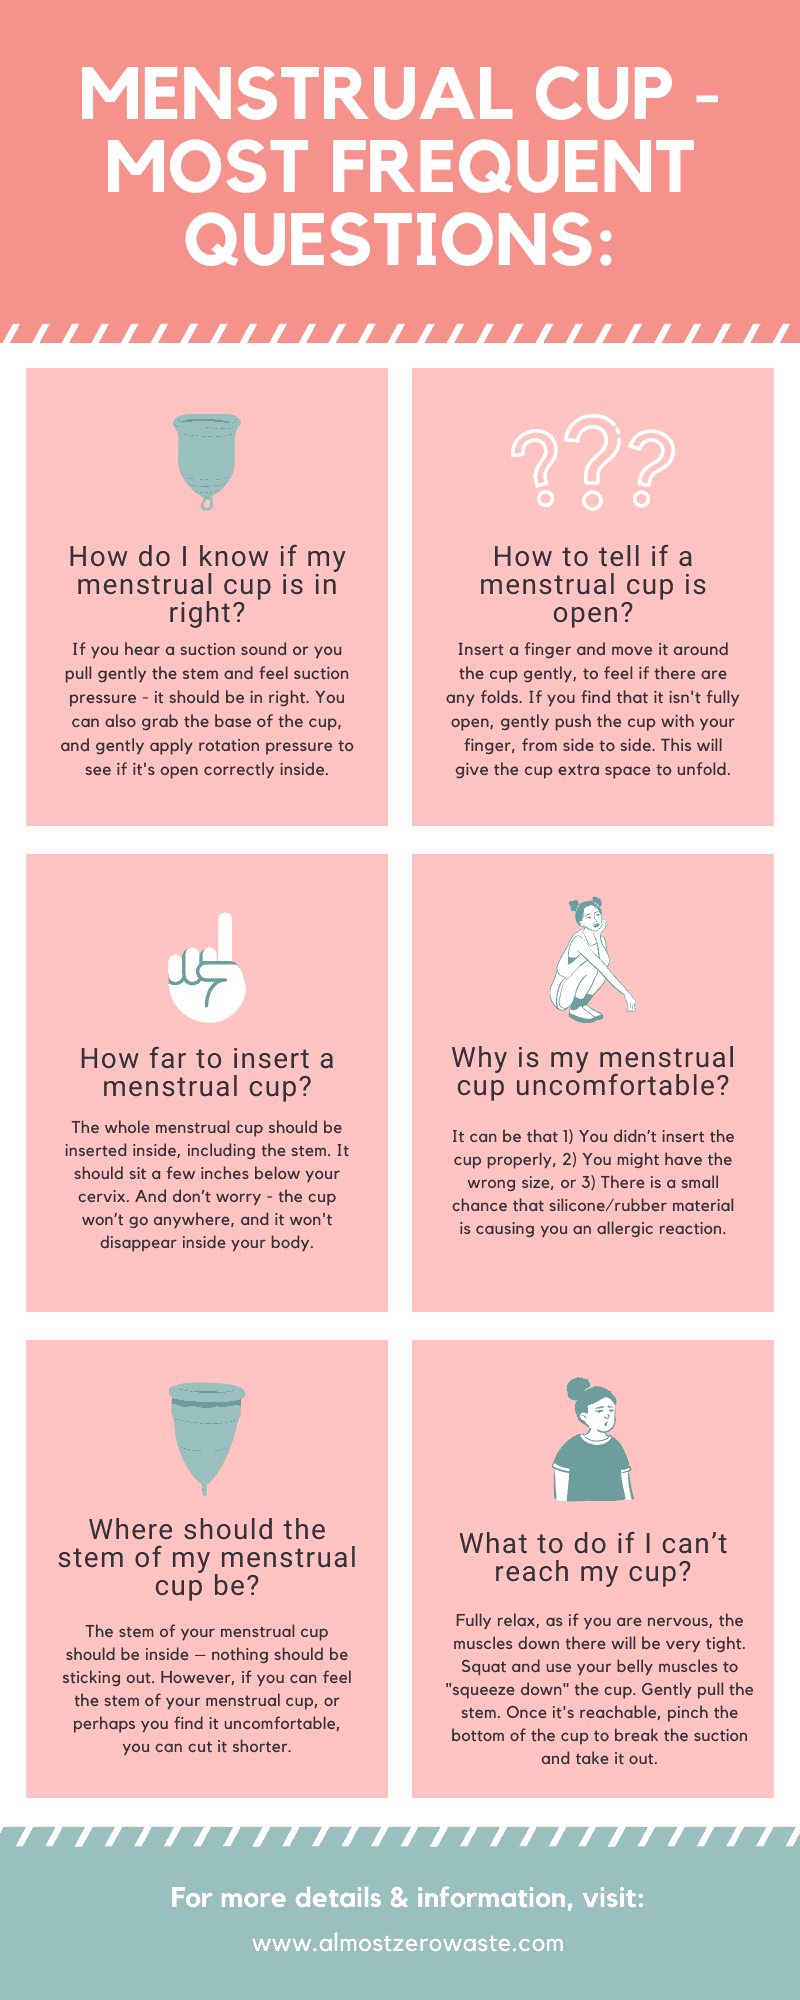 How Do I Know If My Menstrual Cup Is In Right (infographic) - Almost Zero Waste